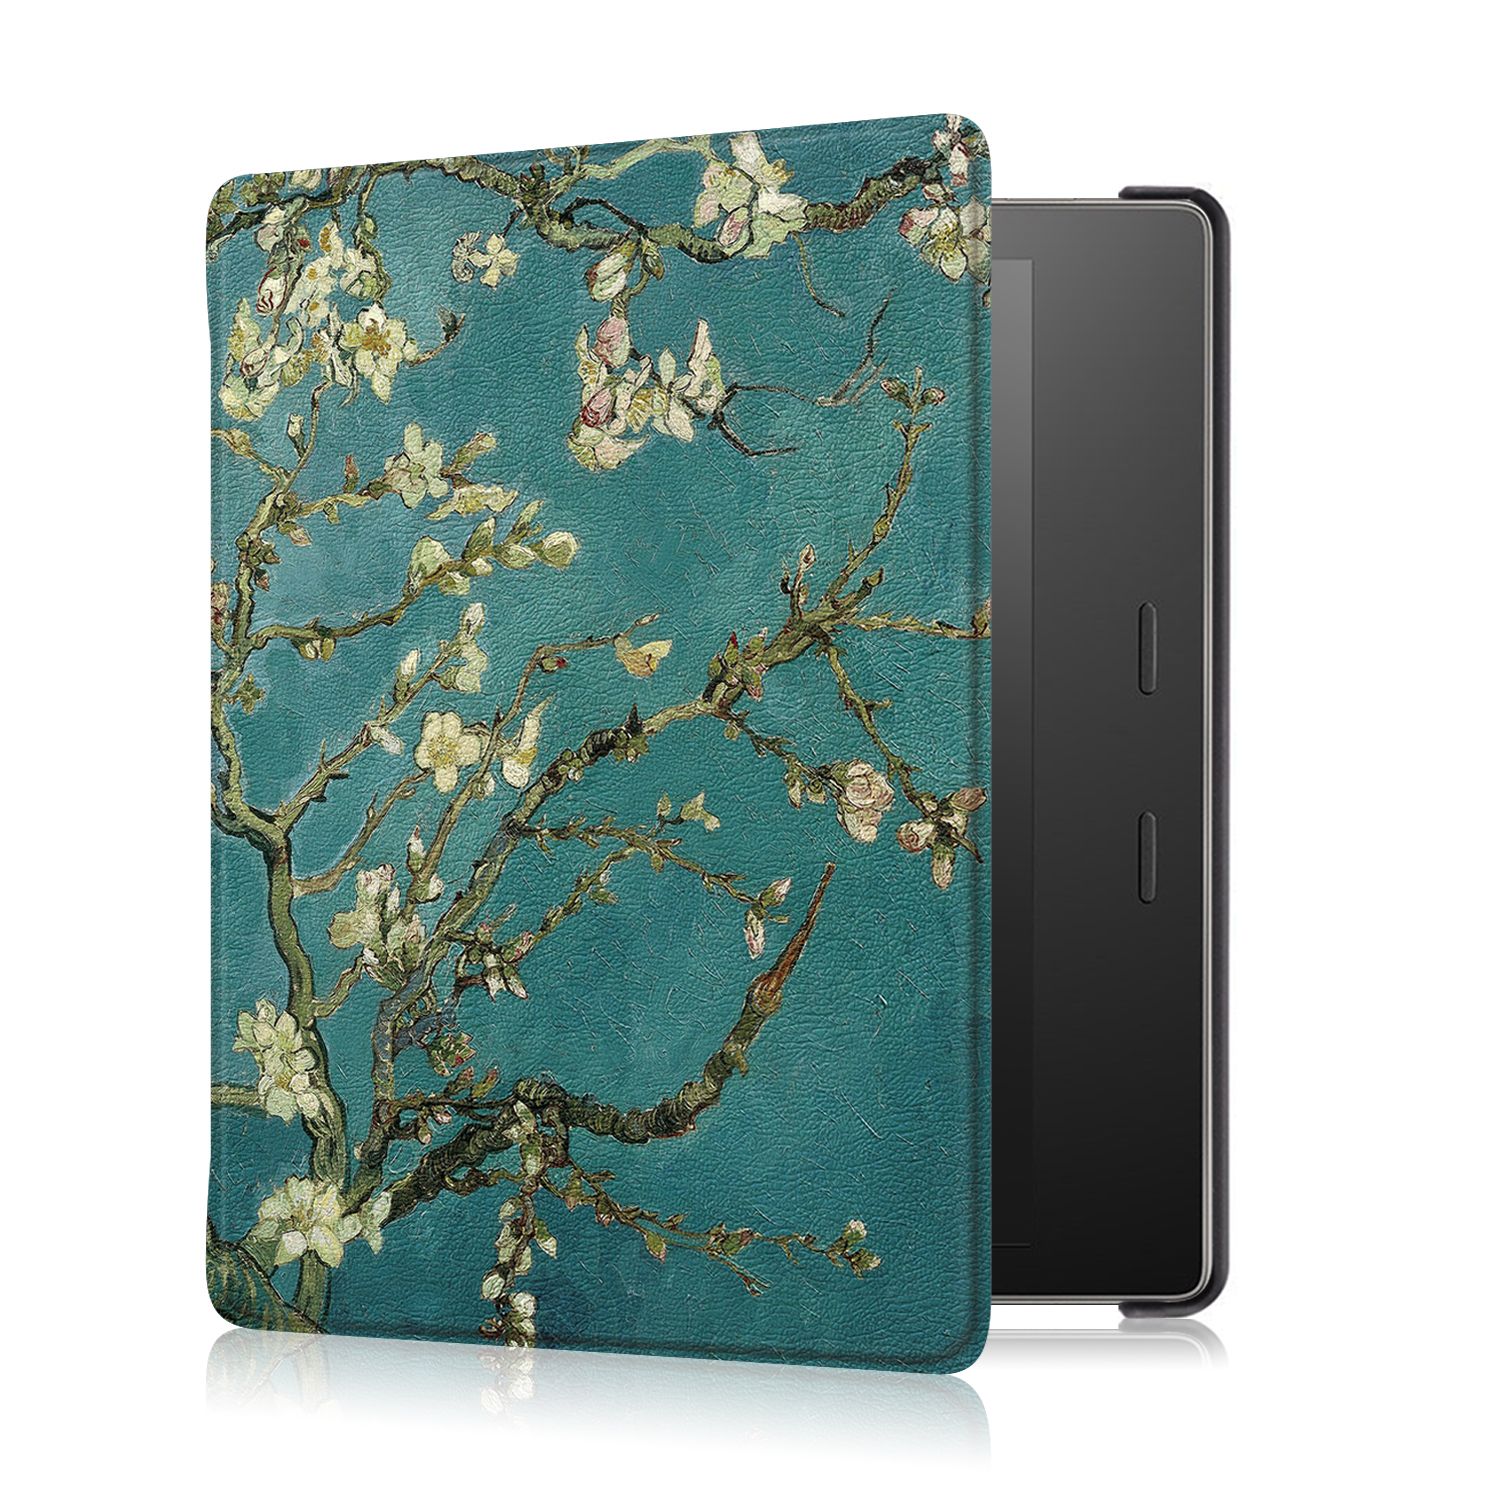 Printing-Tablet-Case-Cover-for-Kindle-oasis-2019---Apricot-Blossom-1539604